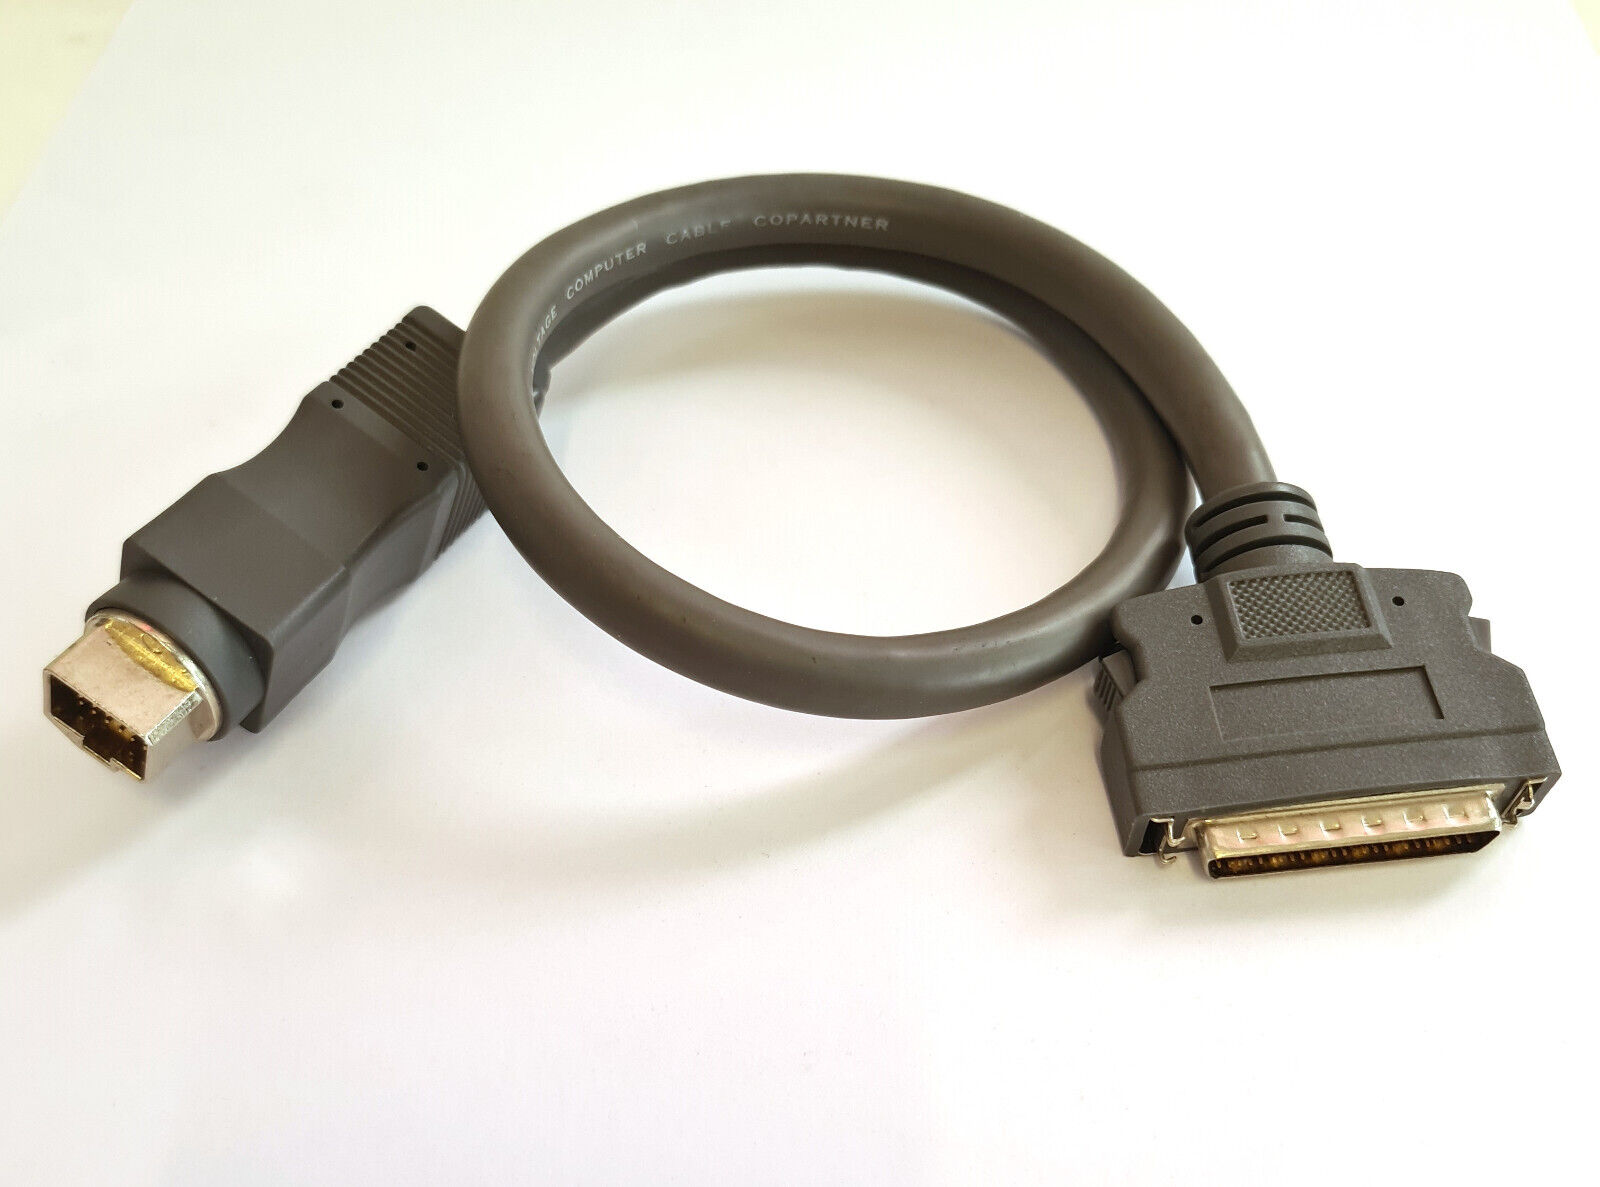 HDI30 to SCSI 2 cable for use with vintage Apple Macintosh Powerbook laptop